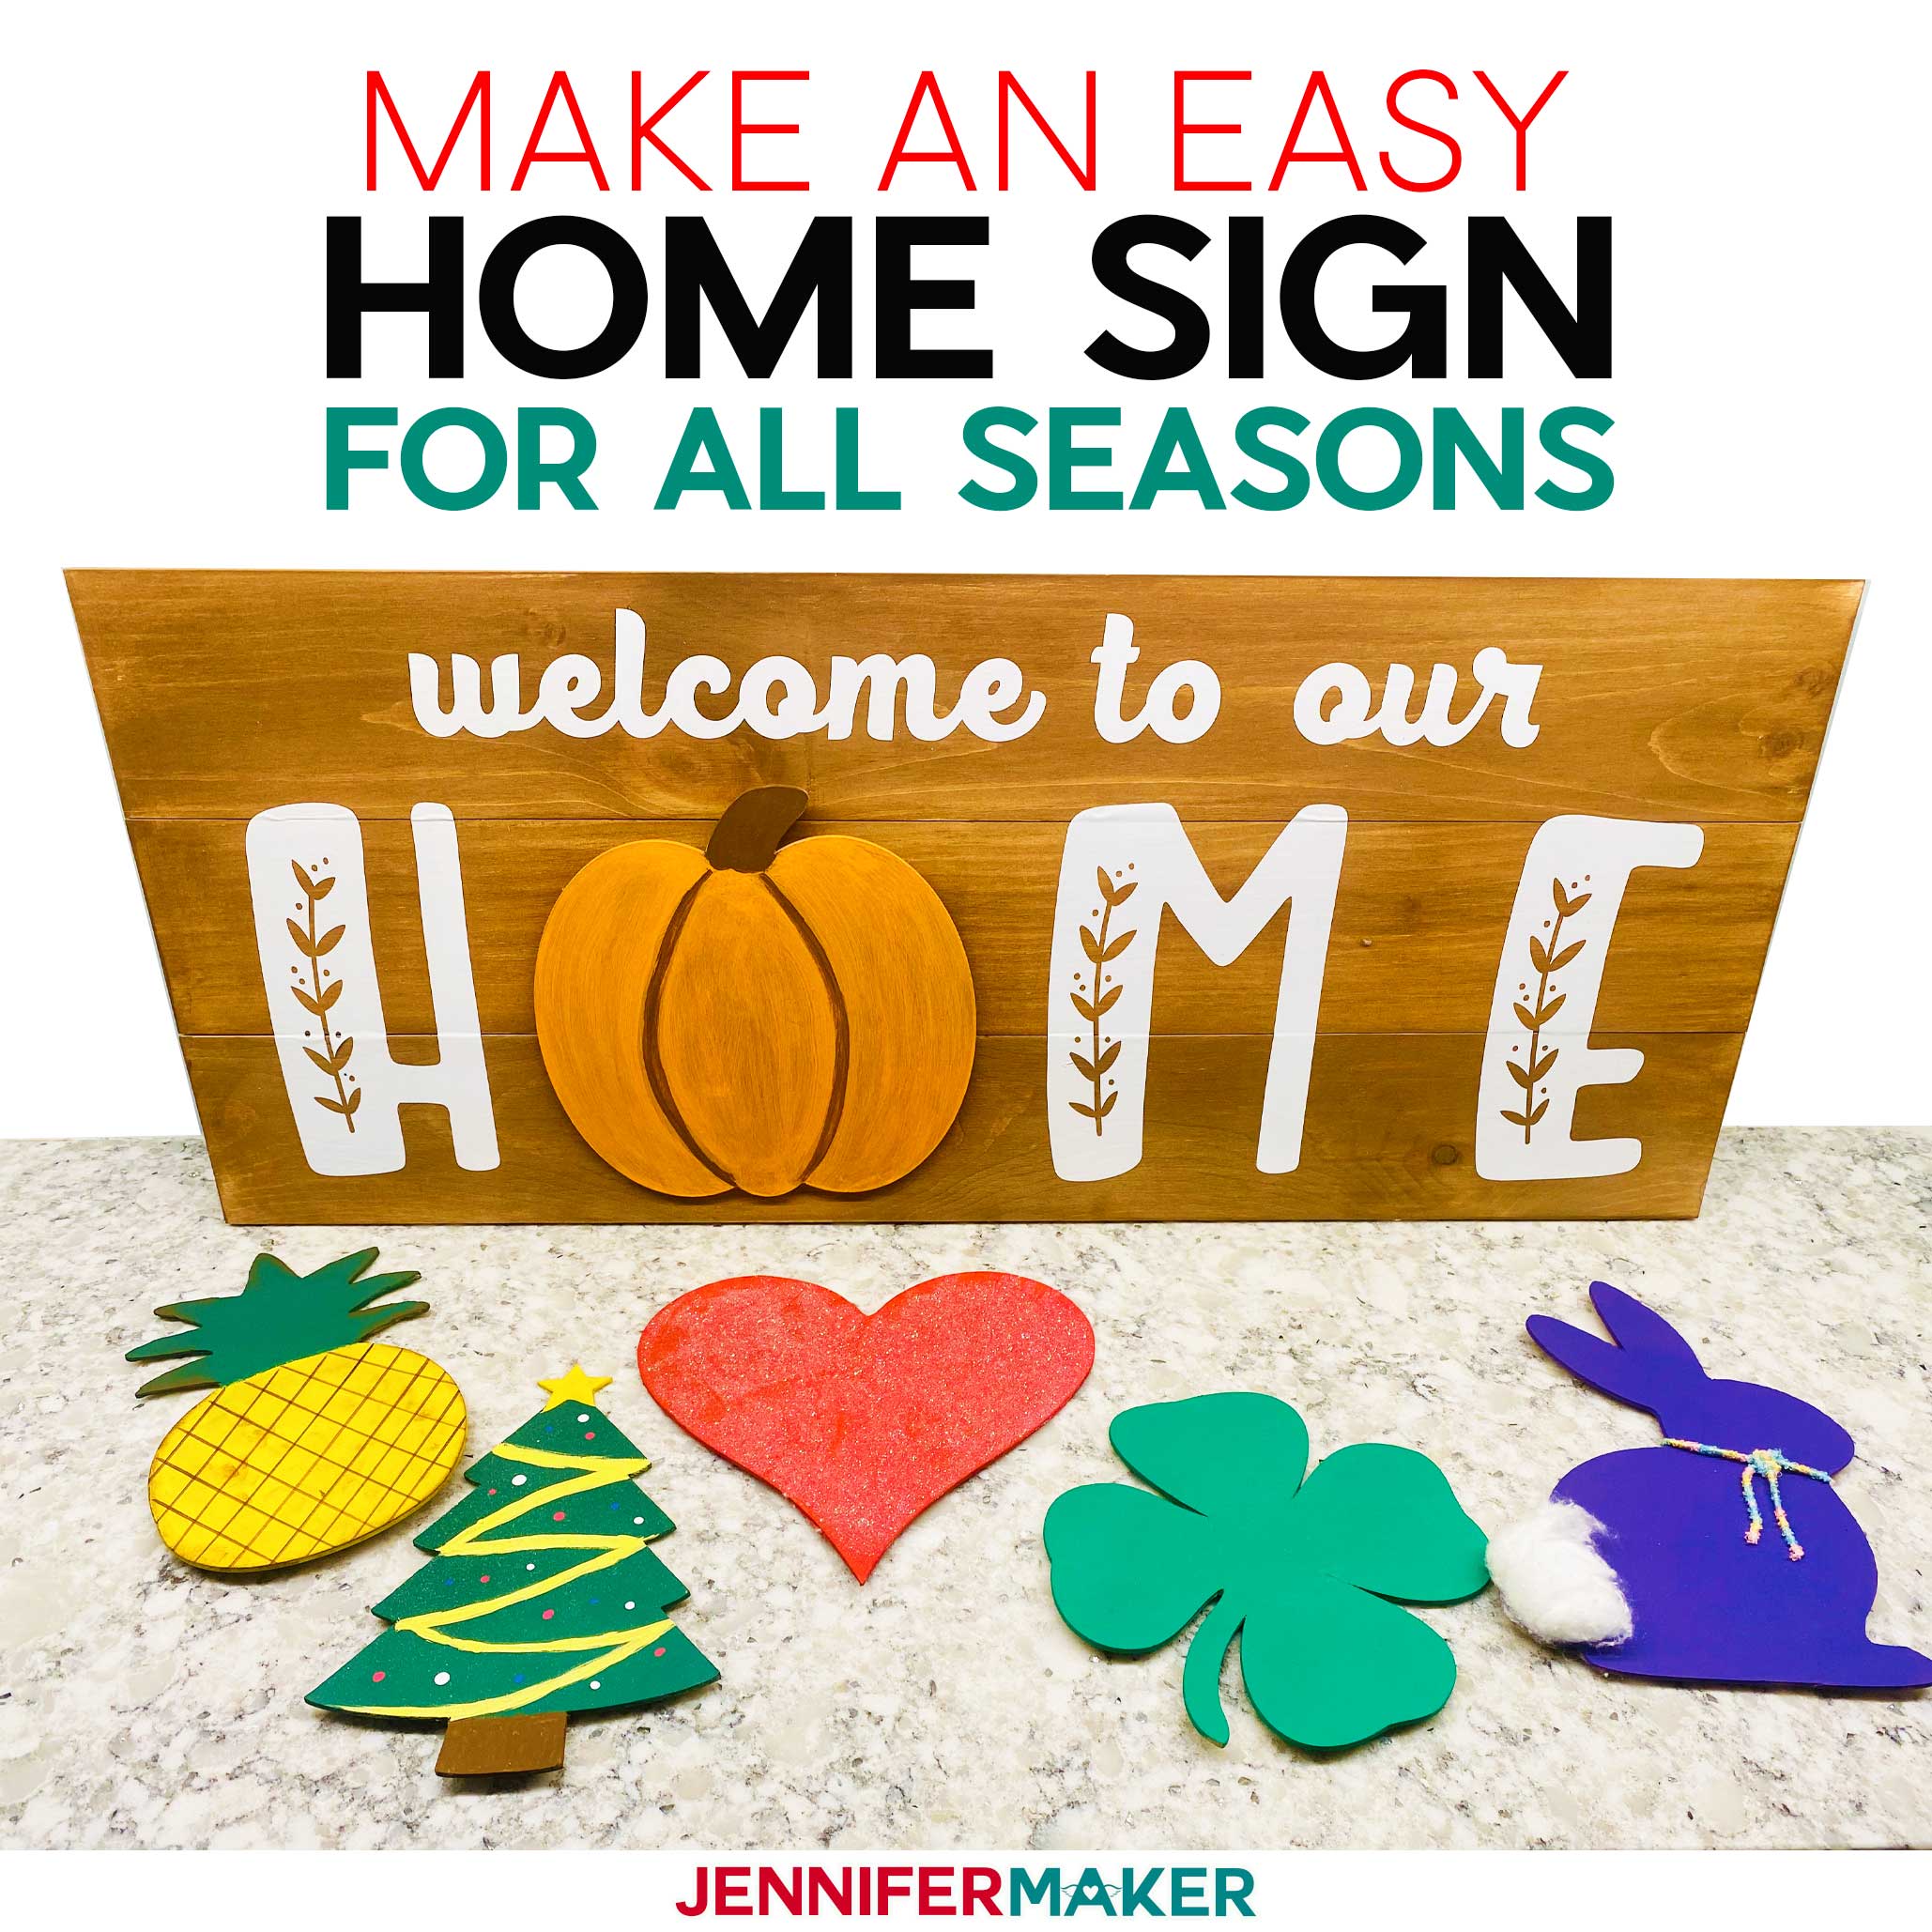 DIY Welcome Home Sign for All Seasons!